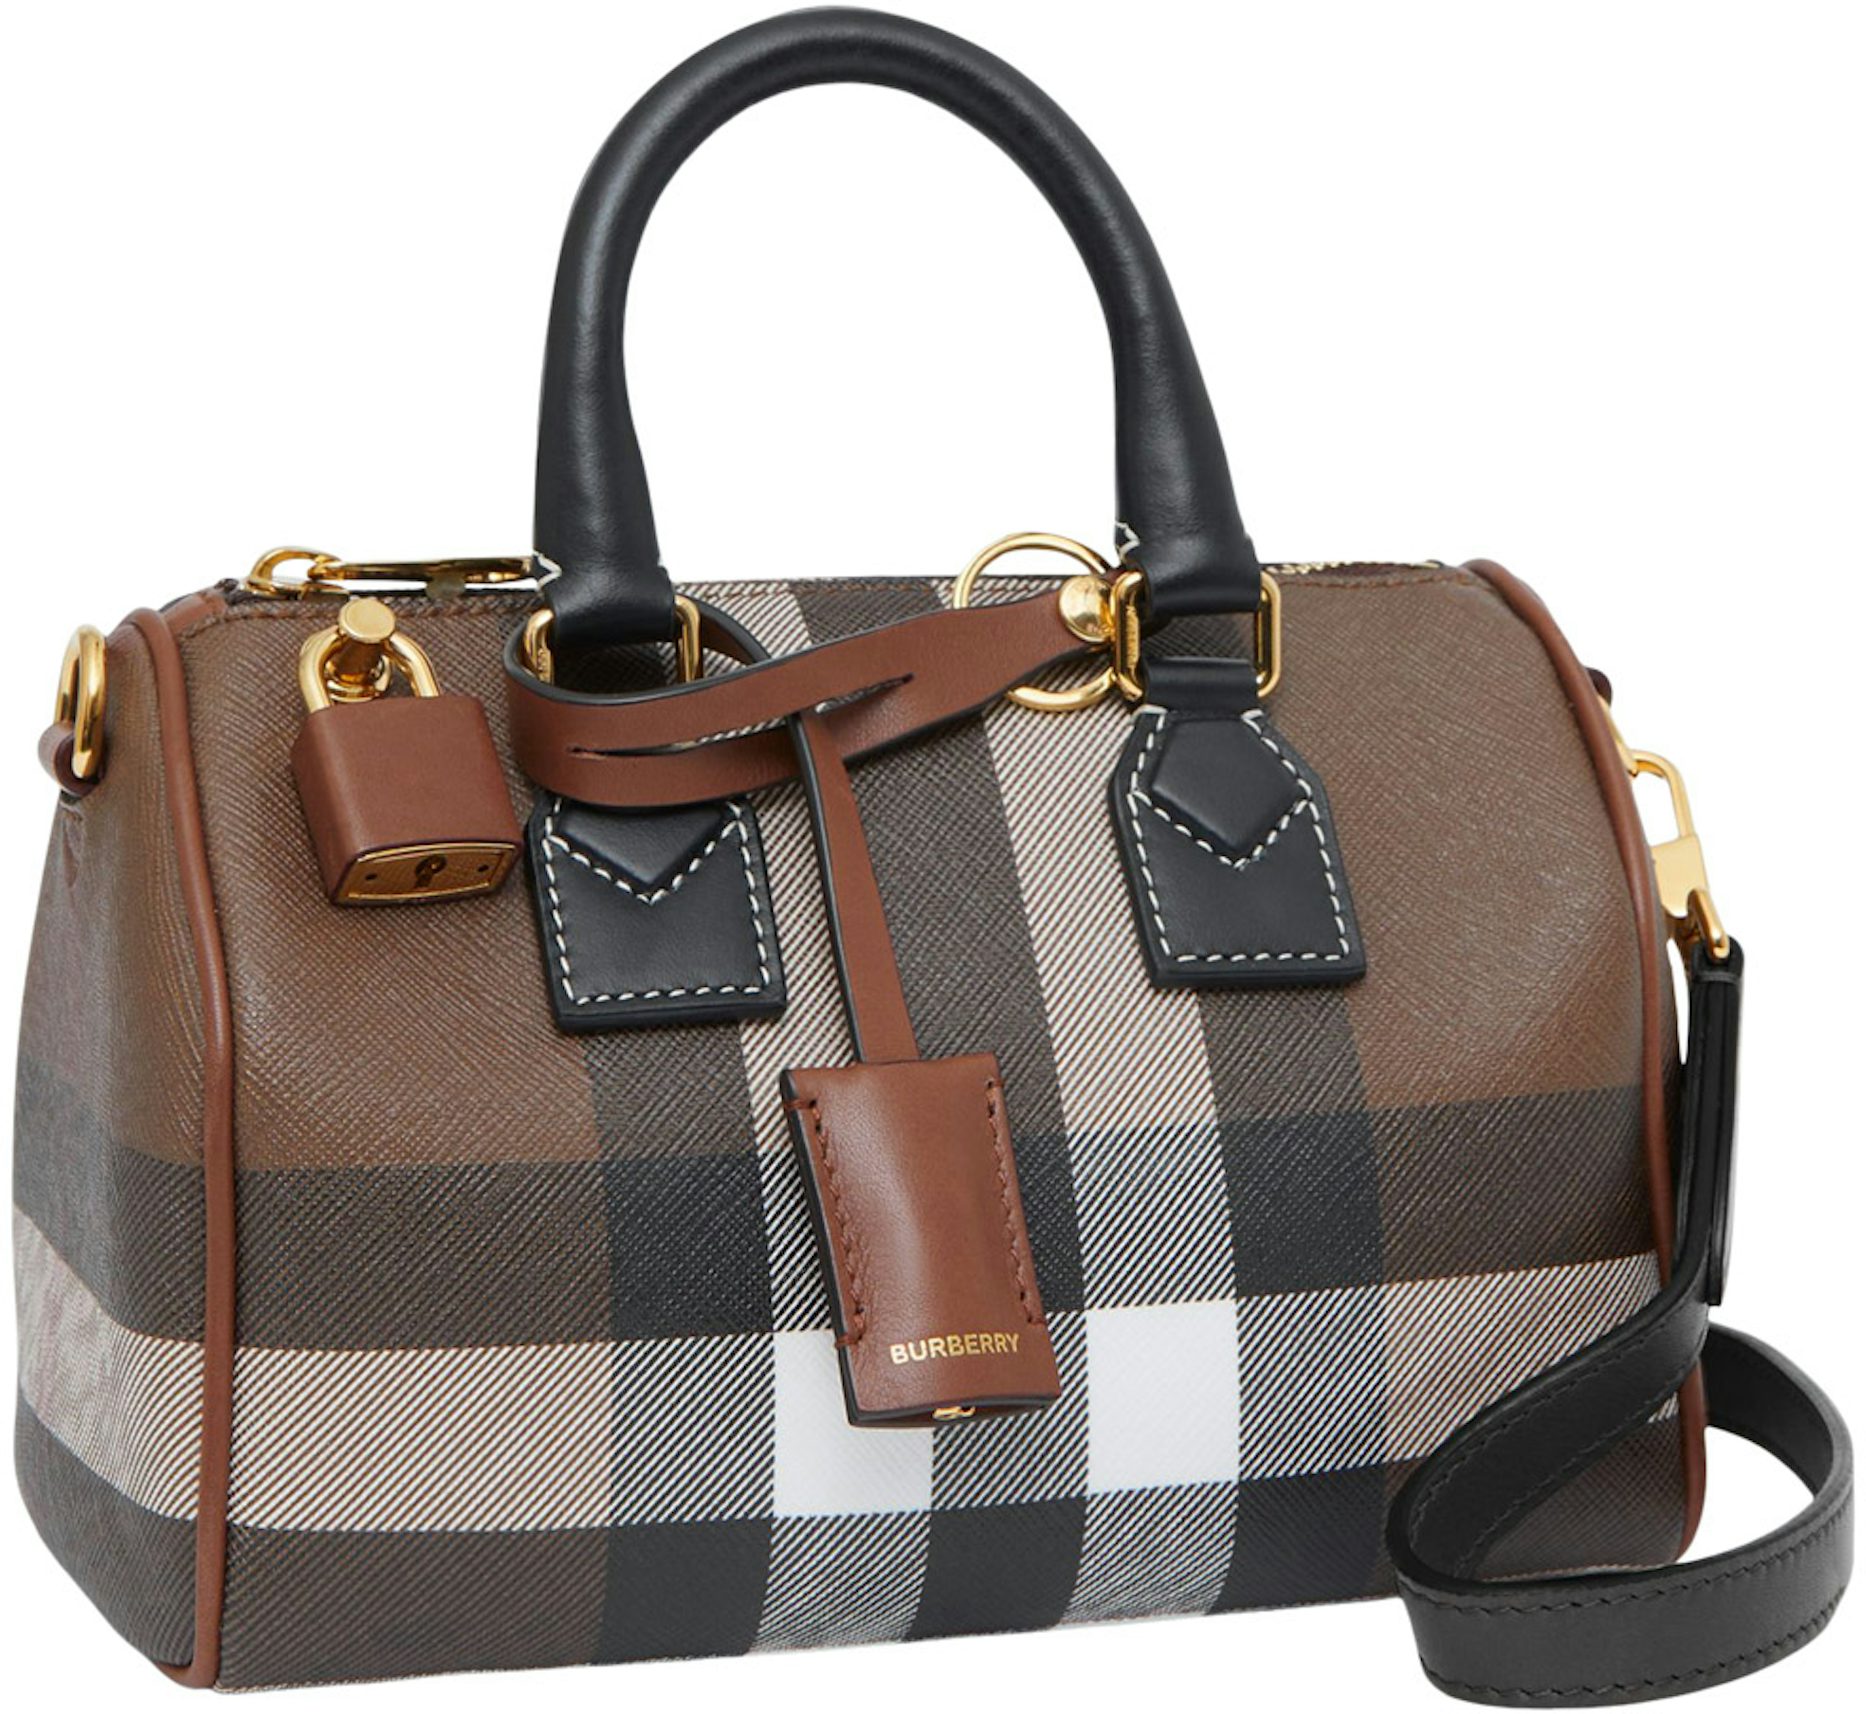 Burberry Mini Check Bowling Bag in Brown